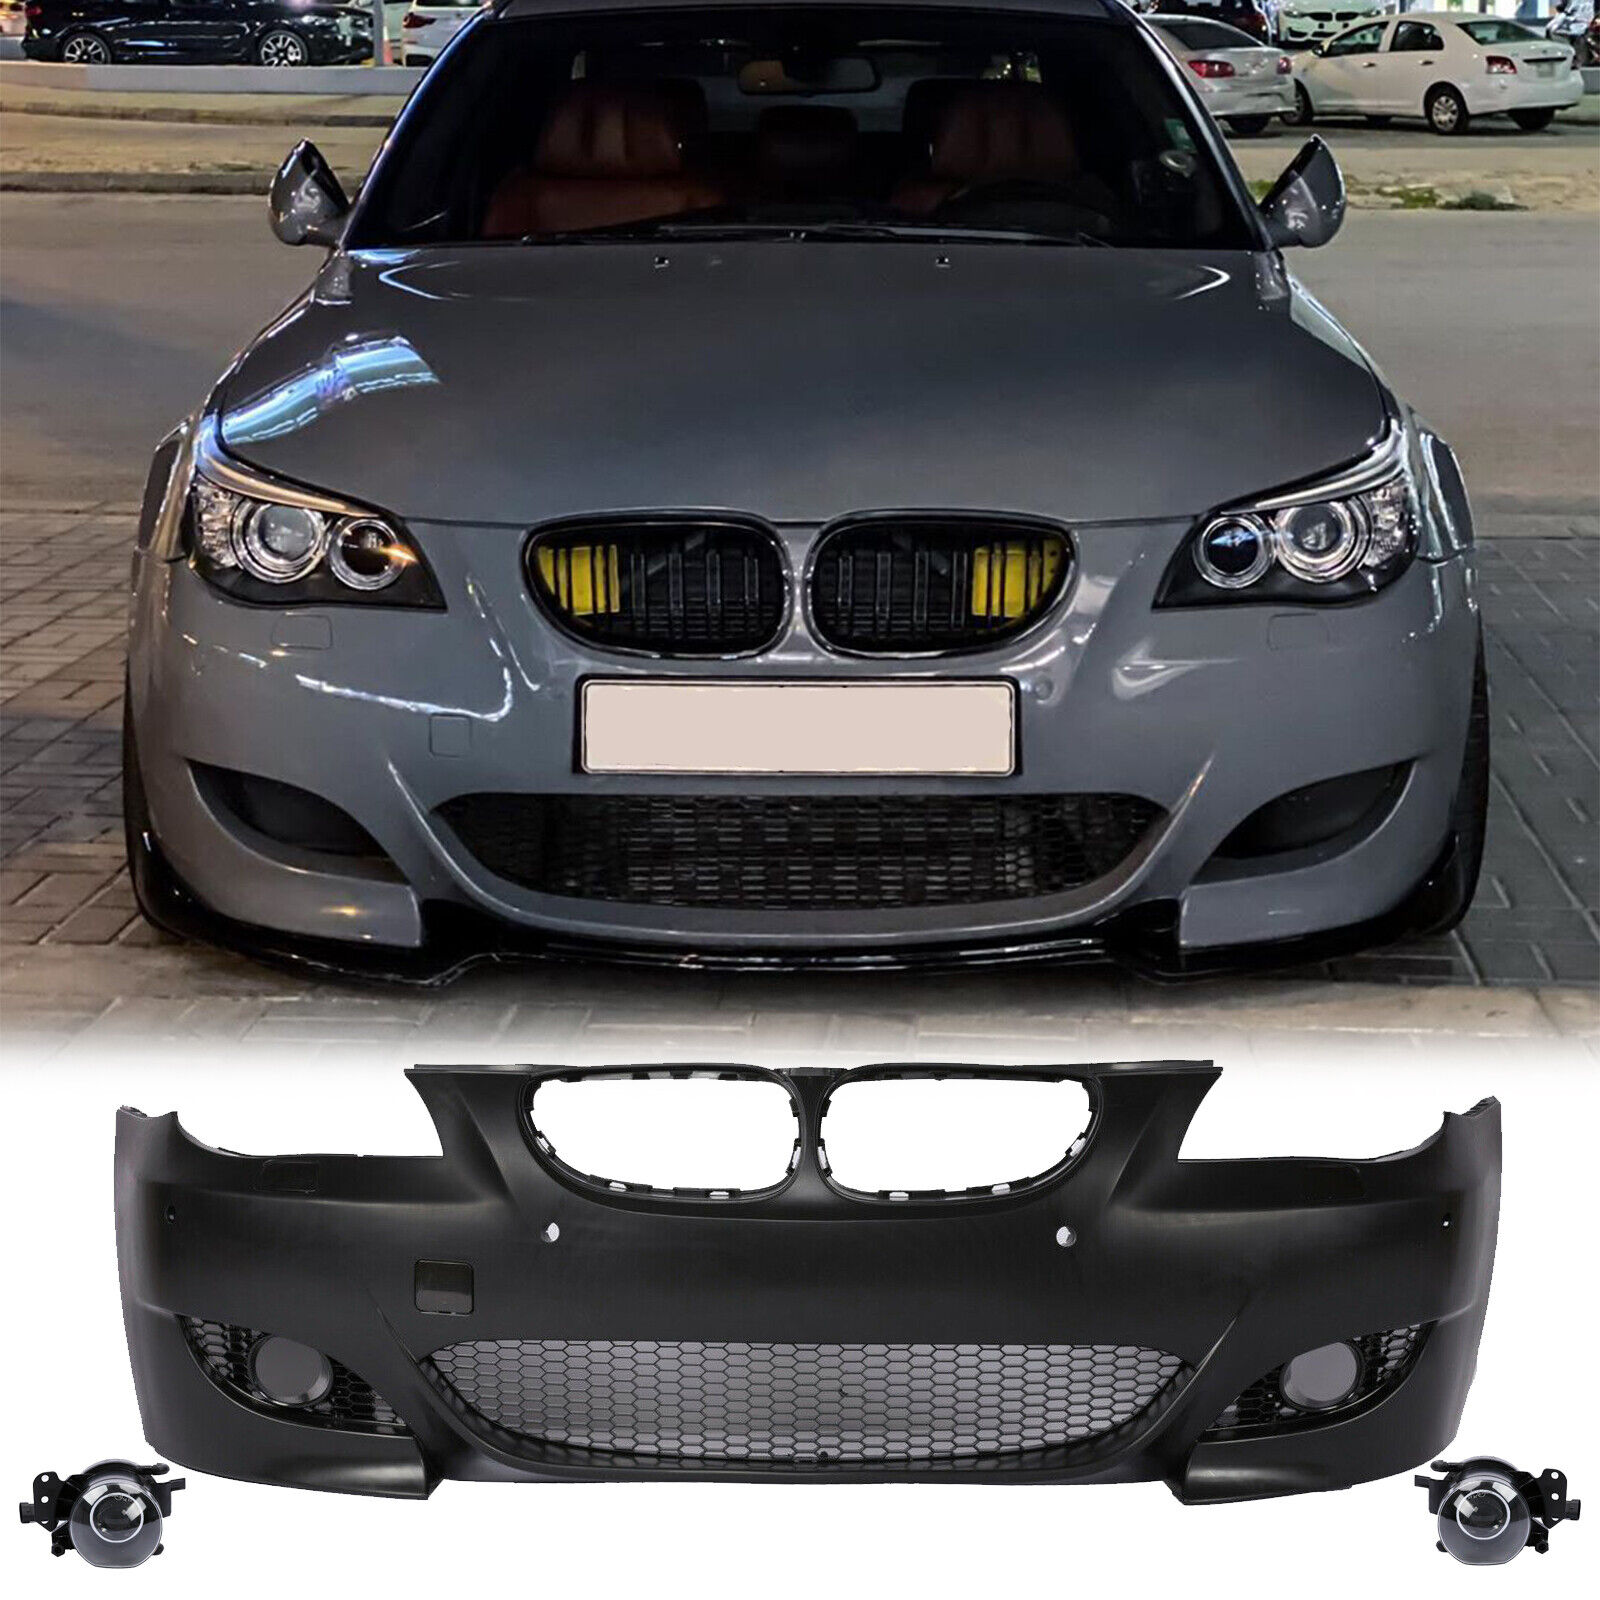 For 08-10 BMW 5 SERIES E60 M5 STYLE FRONT BUMPER W/ FOG LIGHTS W/ 18MM PDC